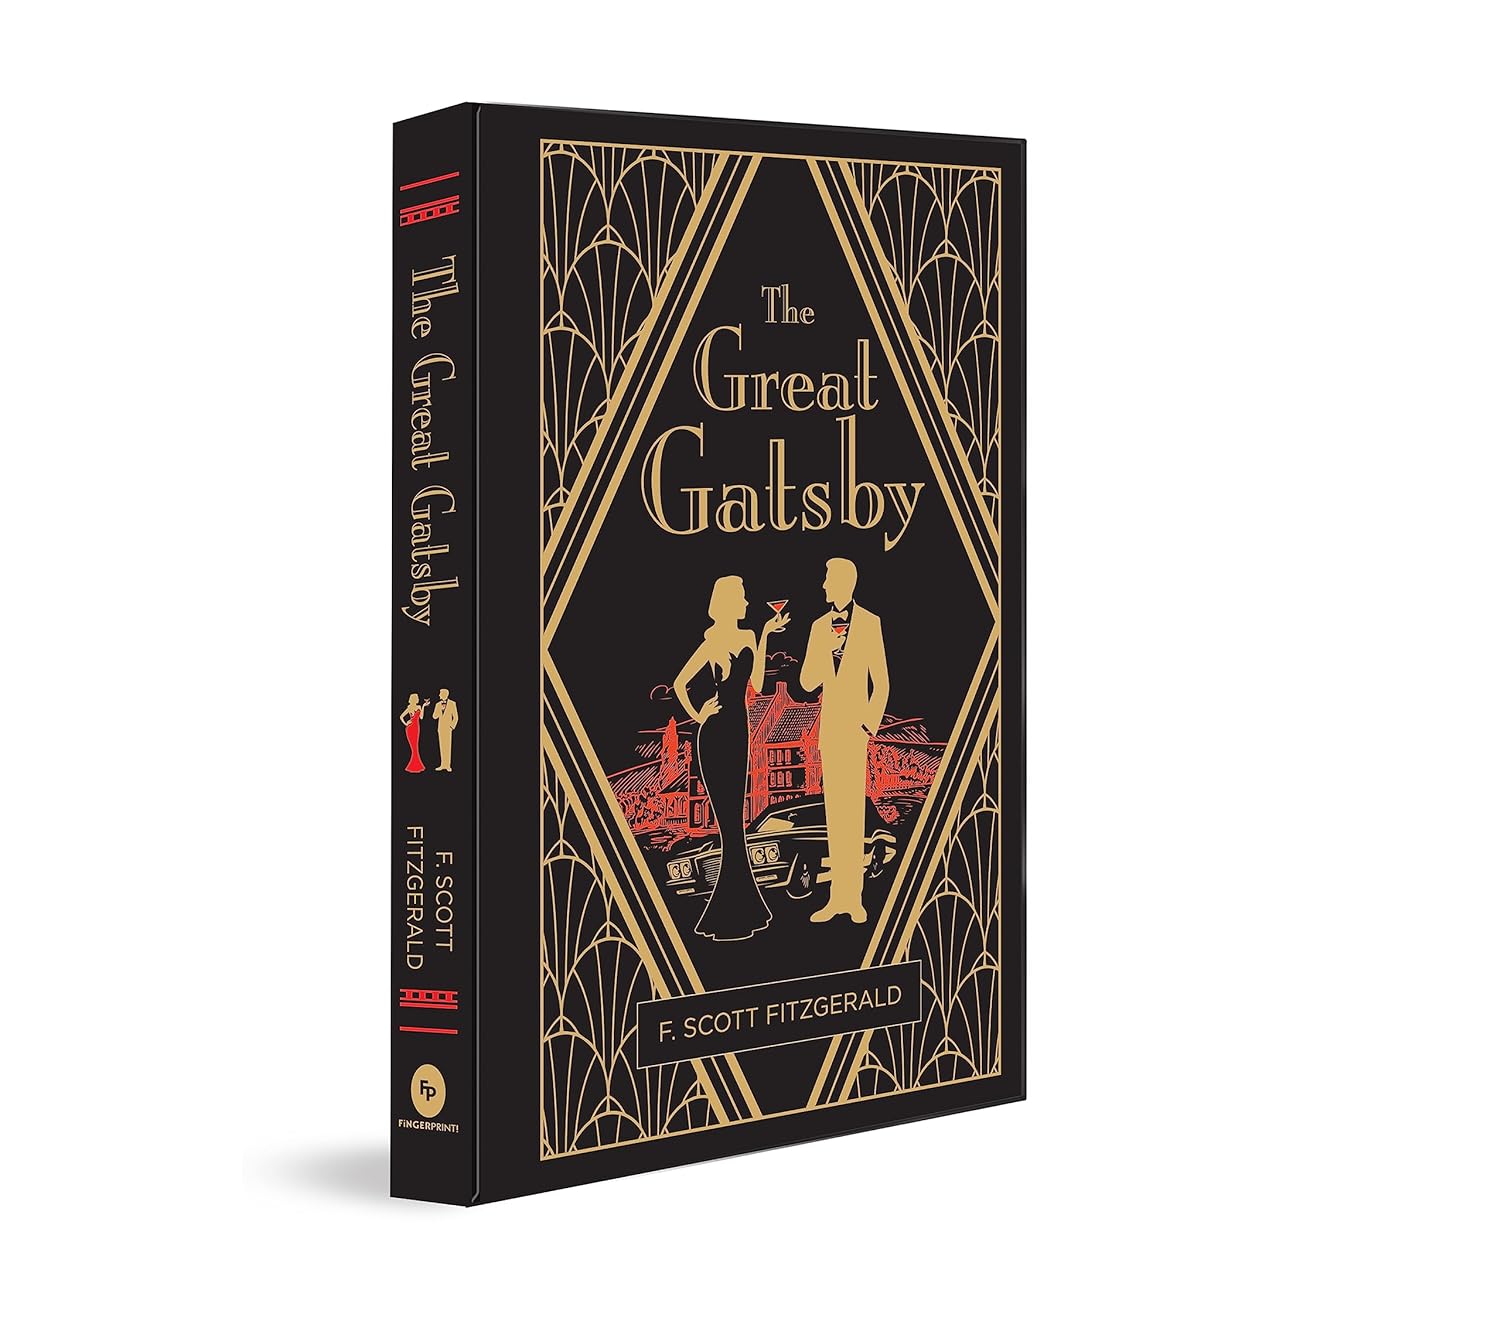 The Great Gatsby by F. Scott Fitzgerald (Author)